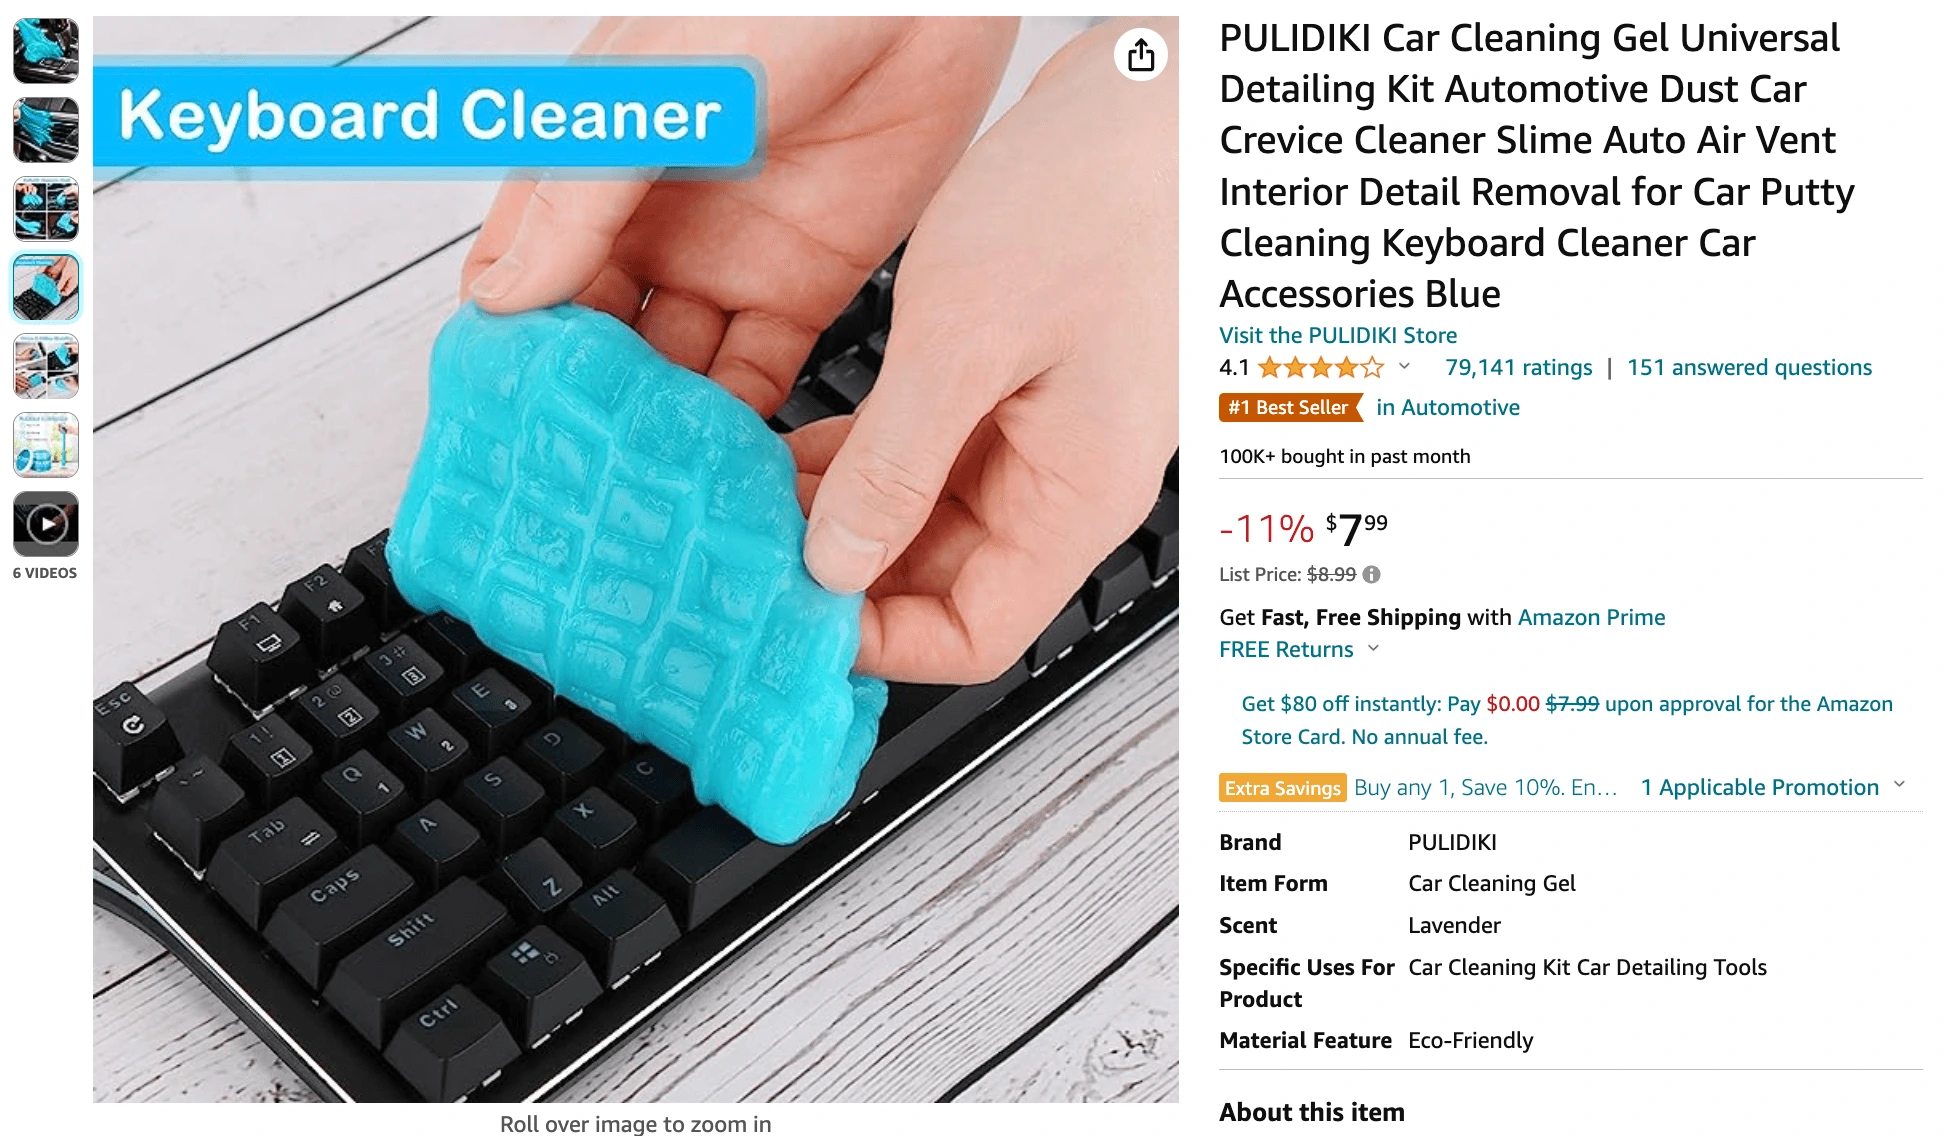  PULIDIKI Cleaning Gel for Car Detailing Putty Car Putty Auto  Detail Tools Car Interior Cleaner Car Cleaning Slime Car Crevice Cleaner  Car Accessories Keyboard Cleaner Purple : Automotive